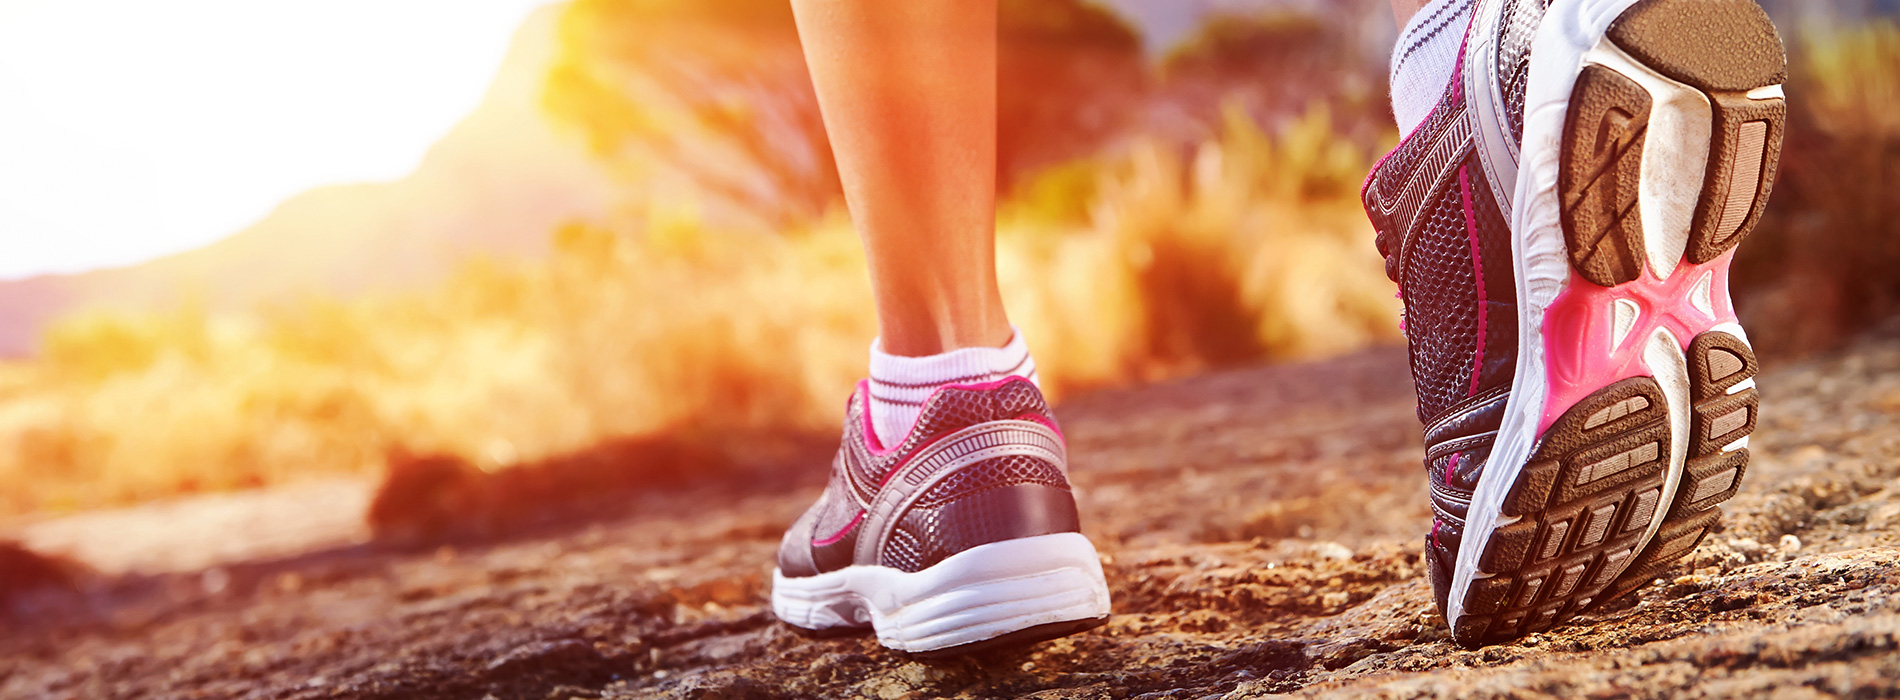 The Foot and Ankle Center of Kirkland | Plantar Fasciitis, Fungal Nails and Pediatric Foot Development